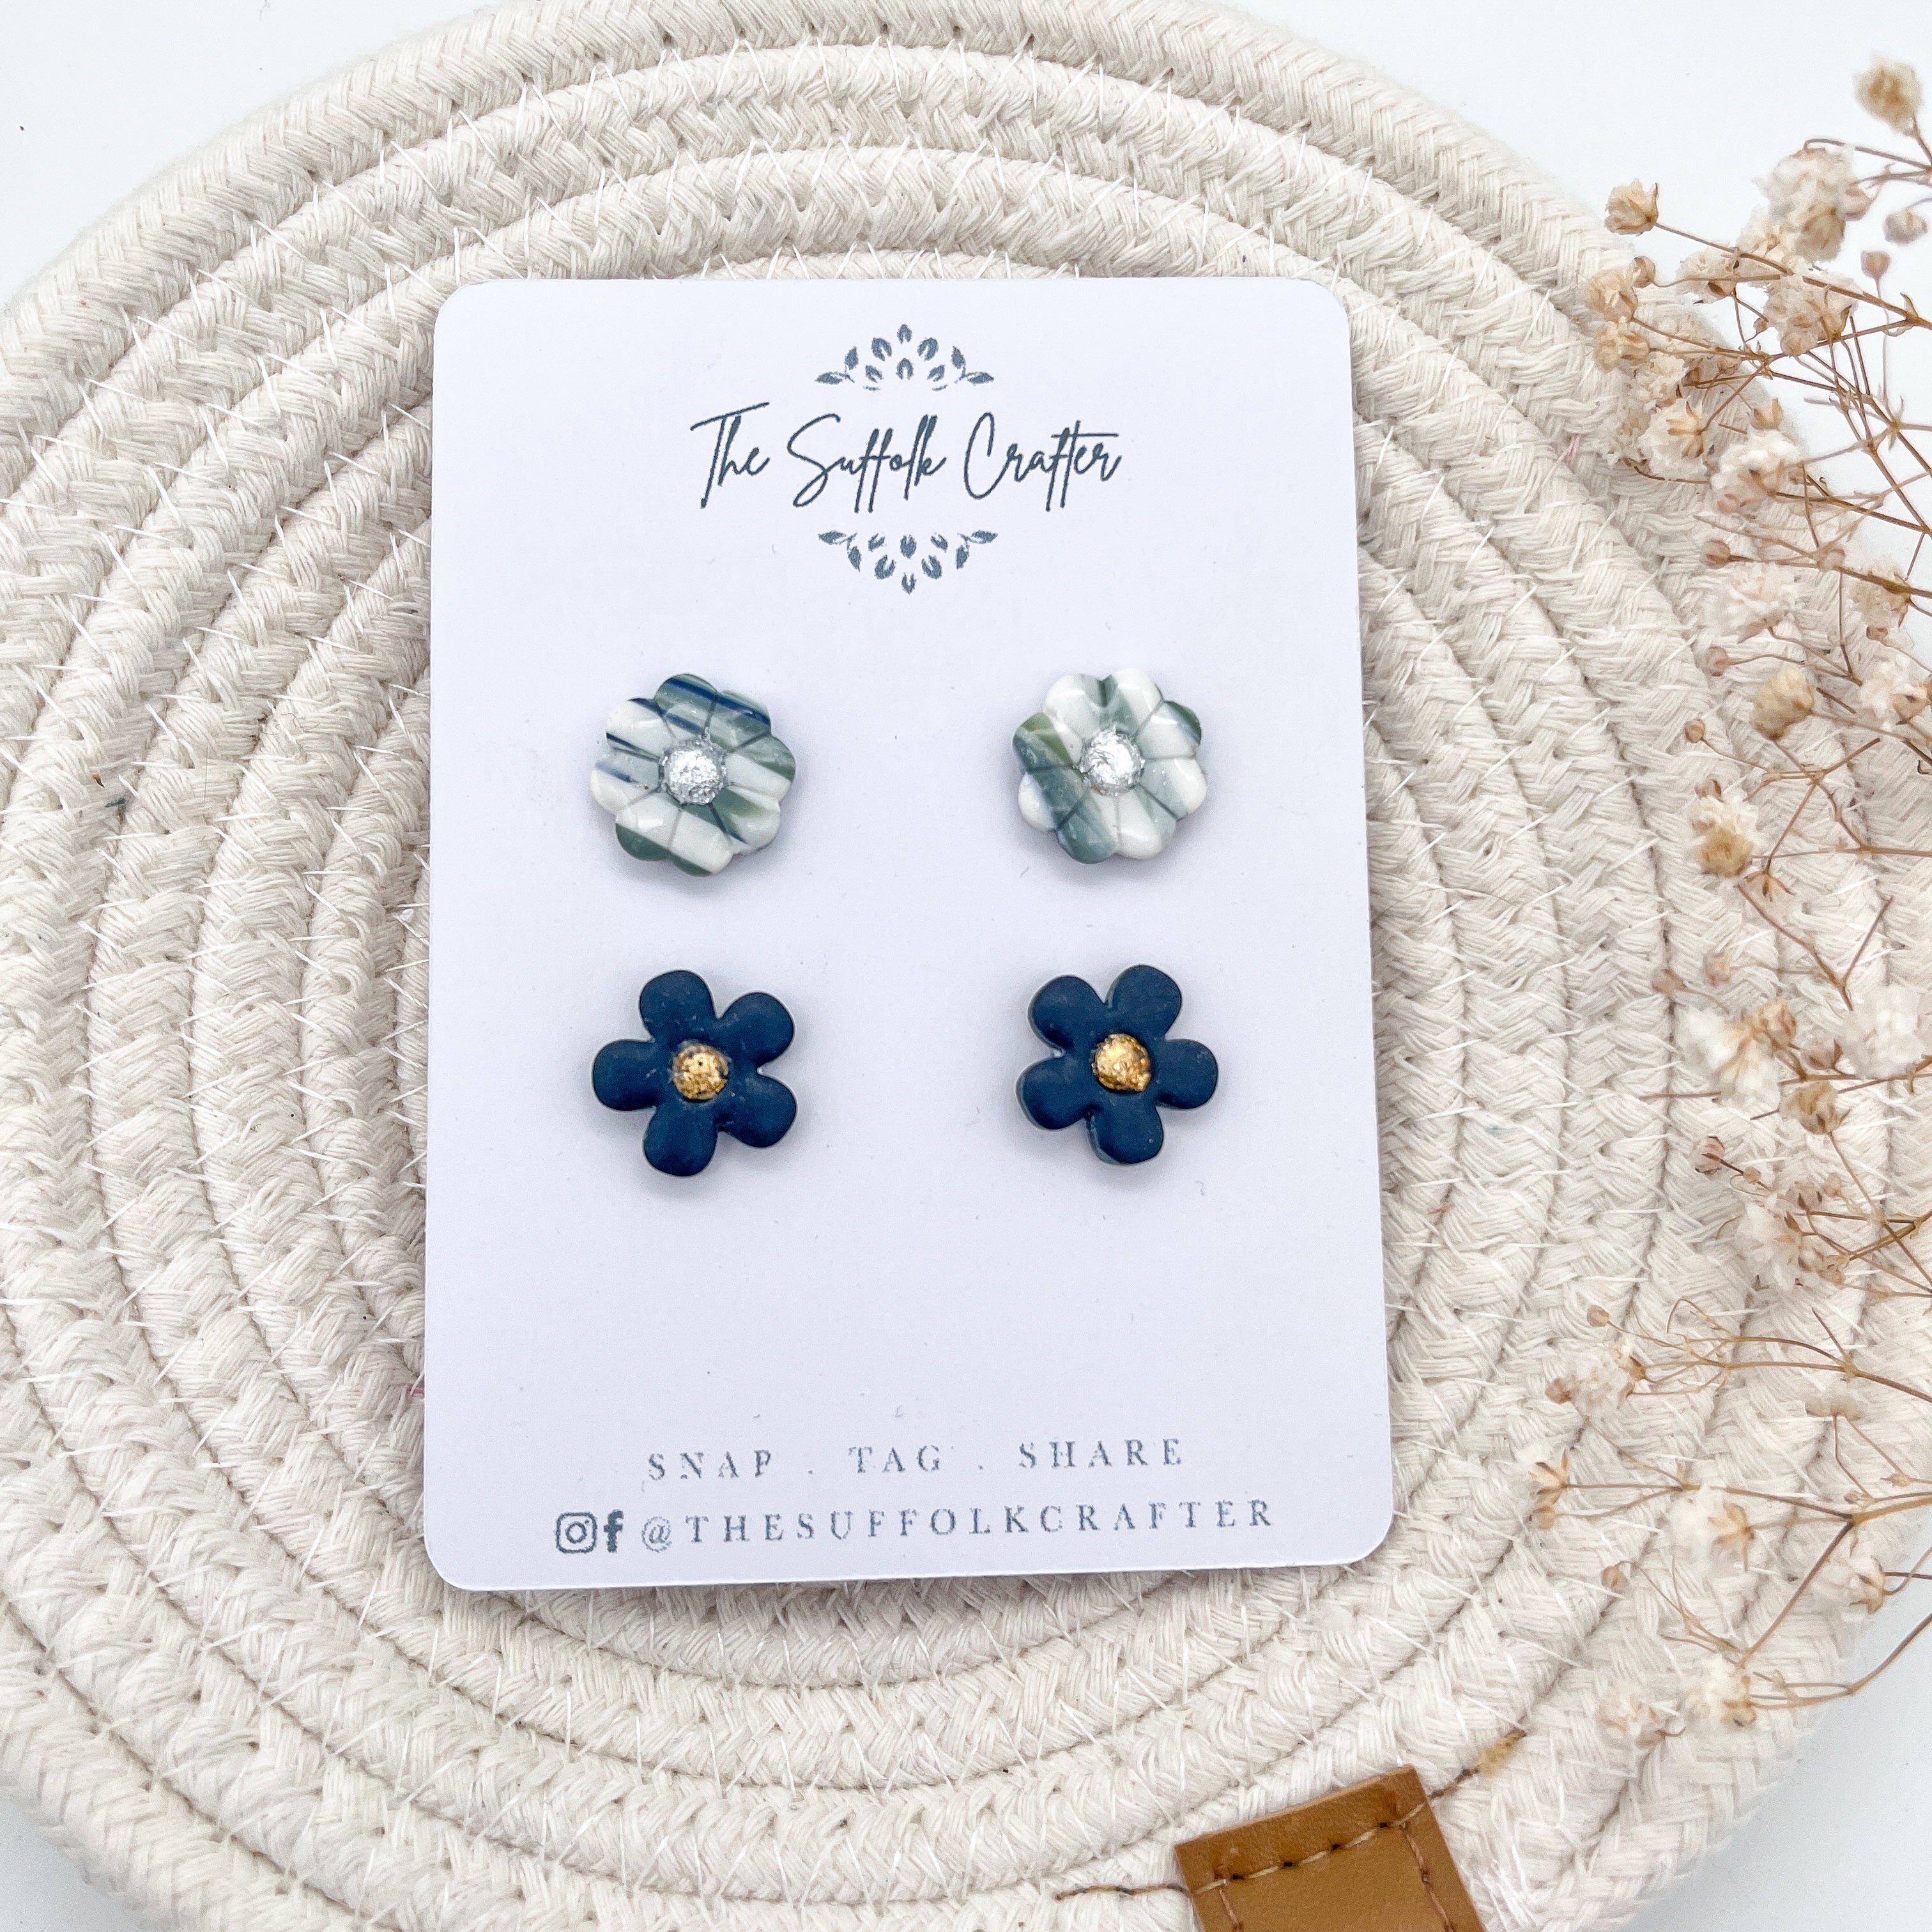 2 Pairs of Blue and Green Flower Stud Earrings